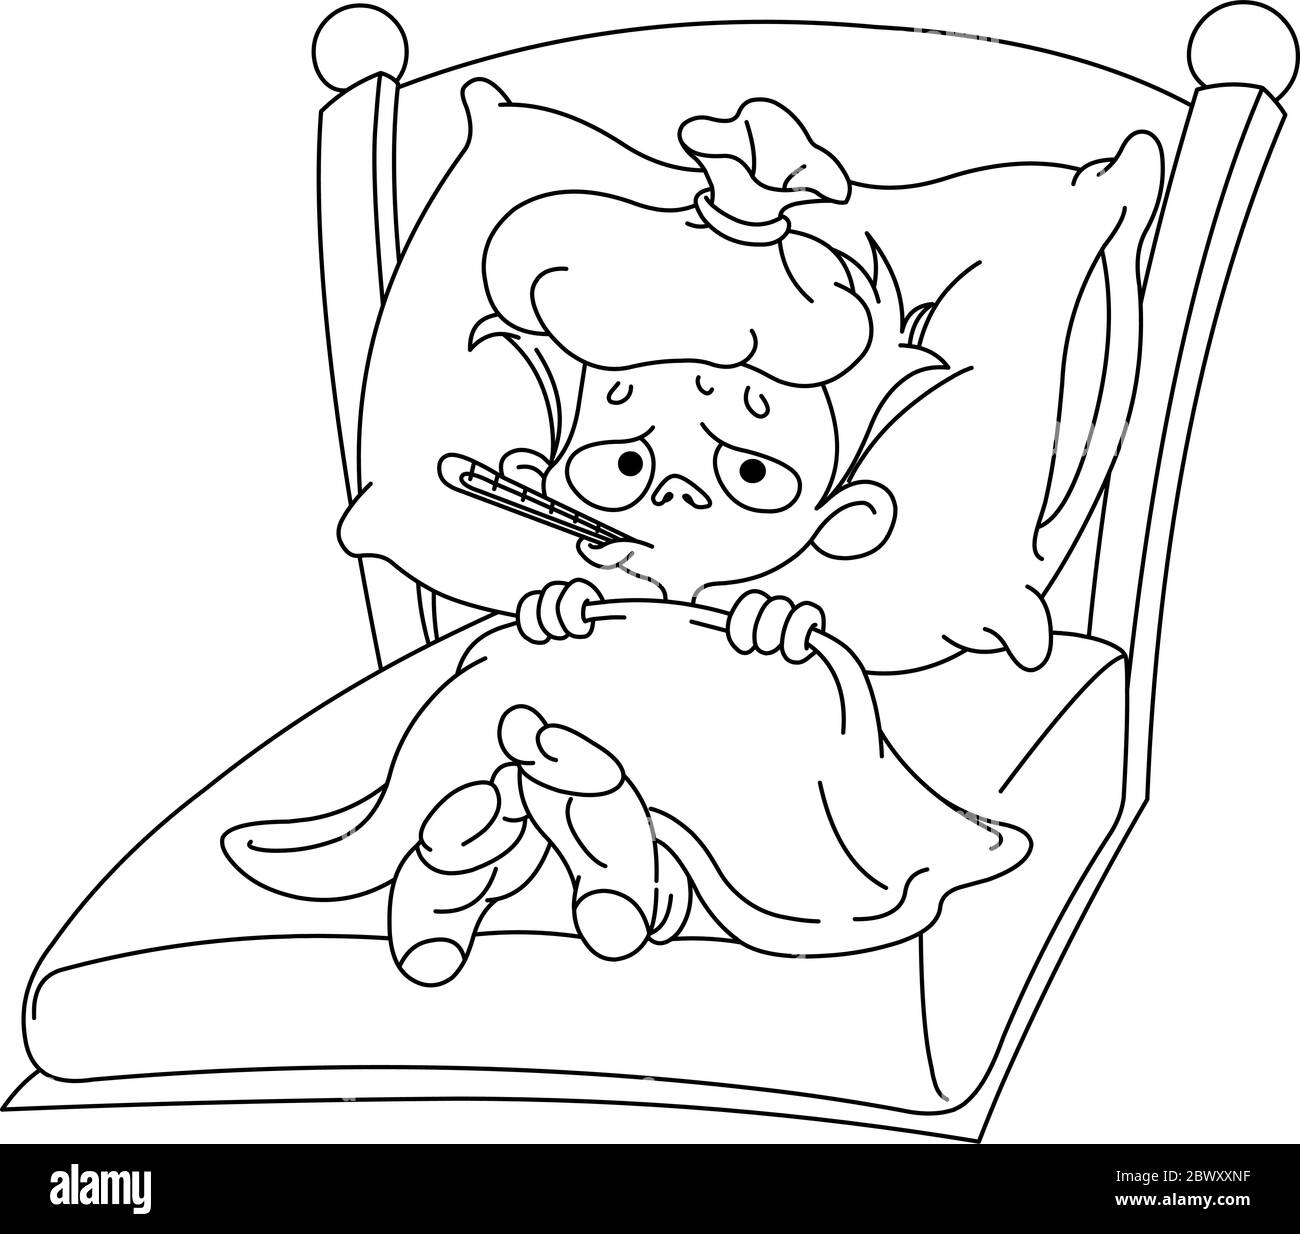 Outlined sick kid lying in bed. Vector illustration coloring page. Stock Vector